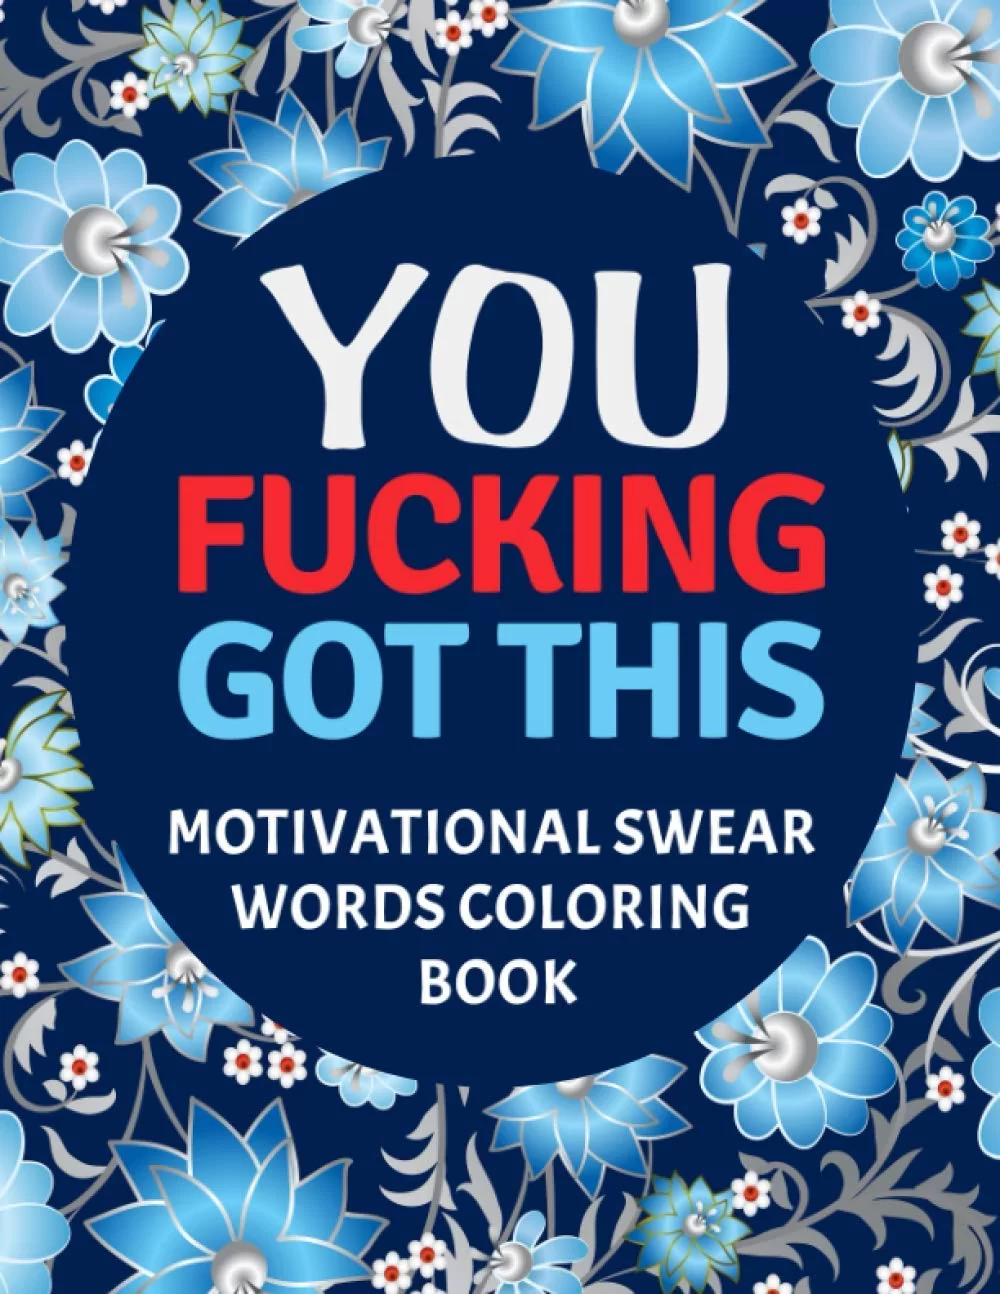 Swear Words Coloring Book